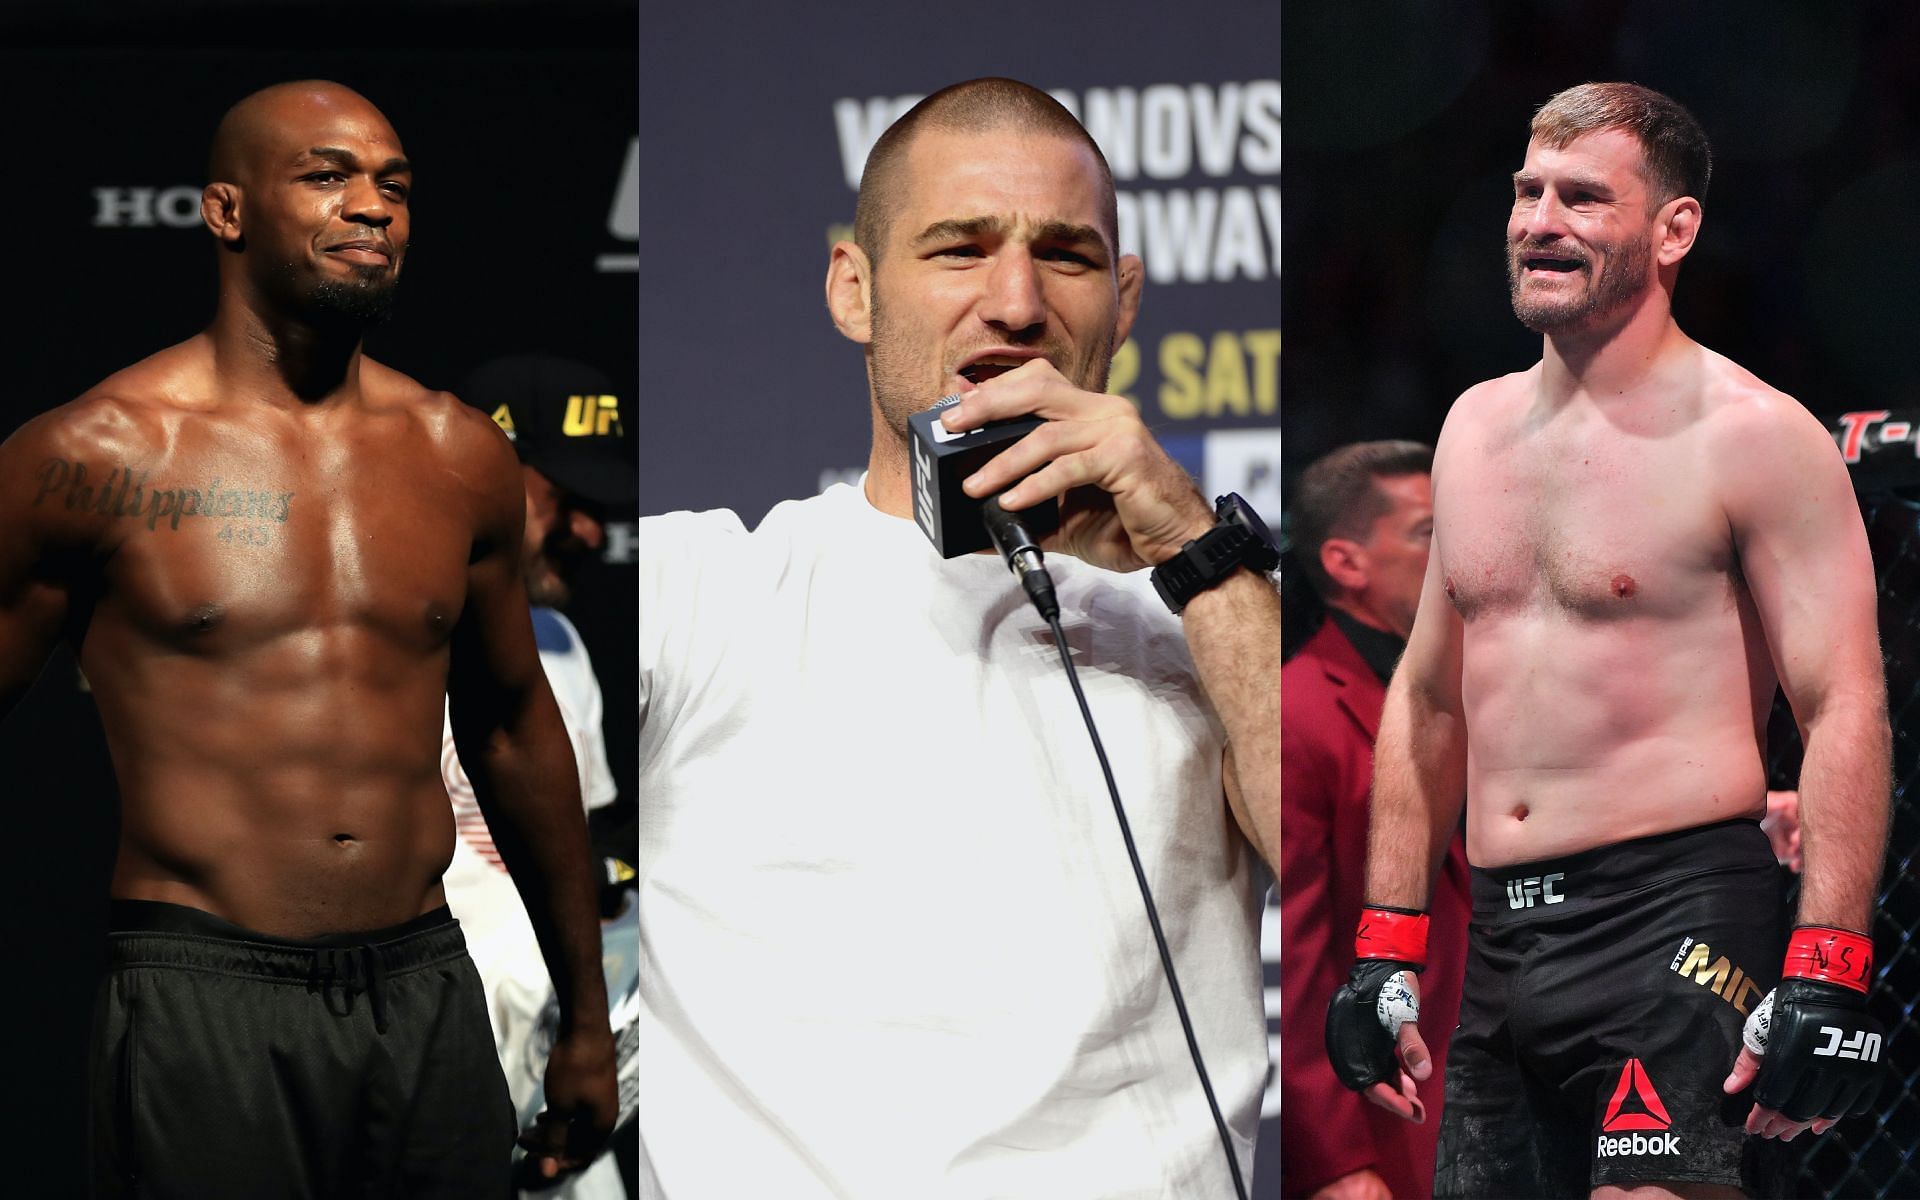 From the left- Jon Jones, Sean Strickland and Stipe Miocic [Image credits: Getty Images]